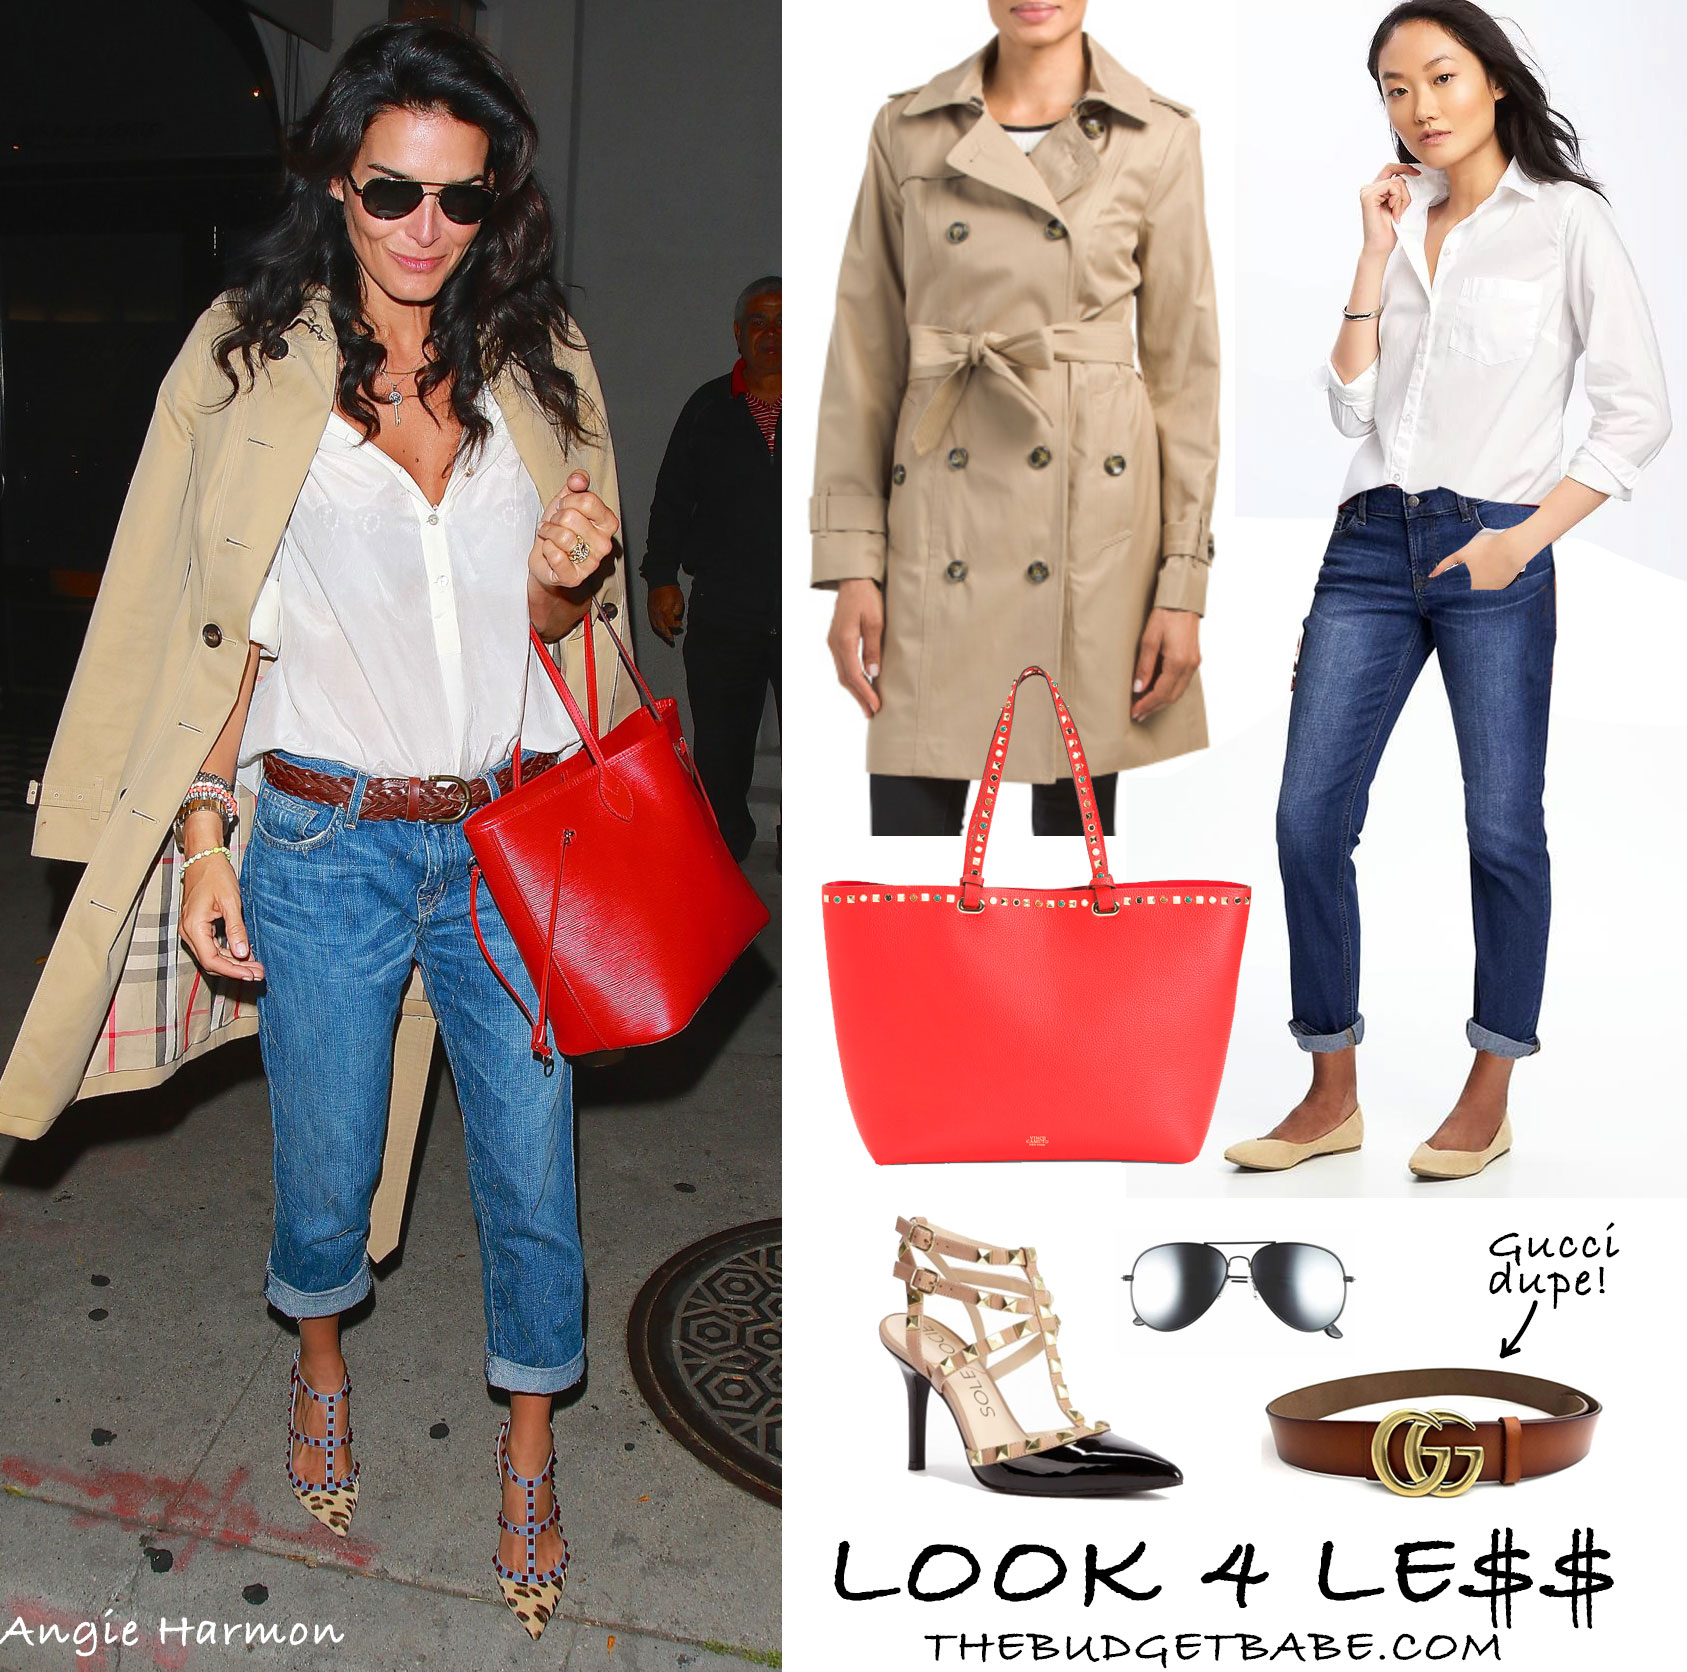 Actress Angie Harmon looks chic and sophisticated in a Burberry trench, white shirt, cuffed jeans and Rockstud heels.